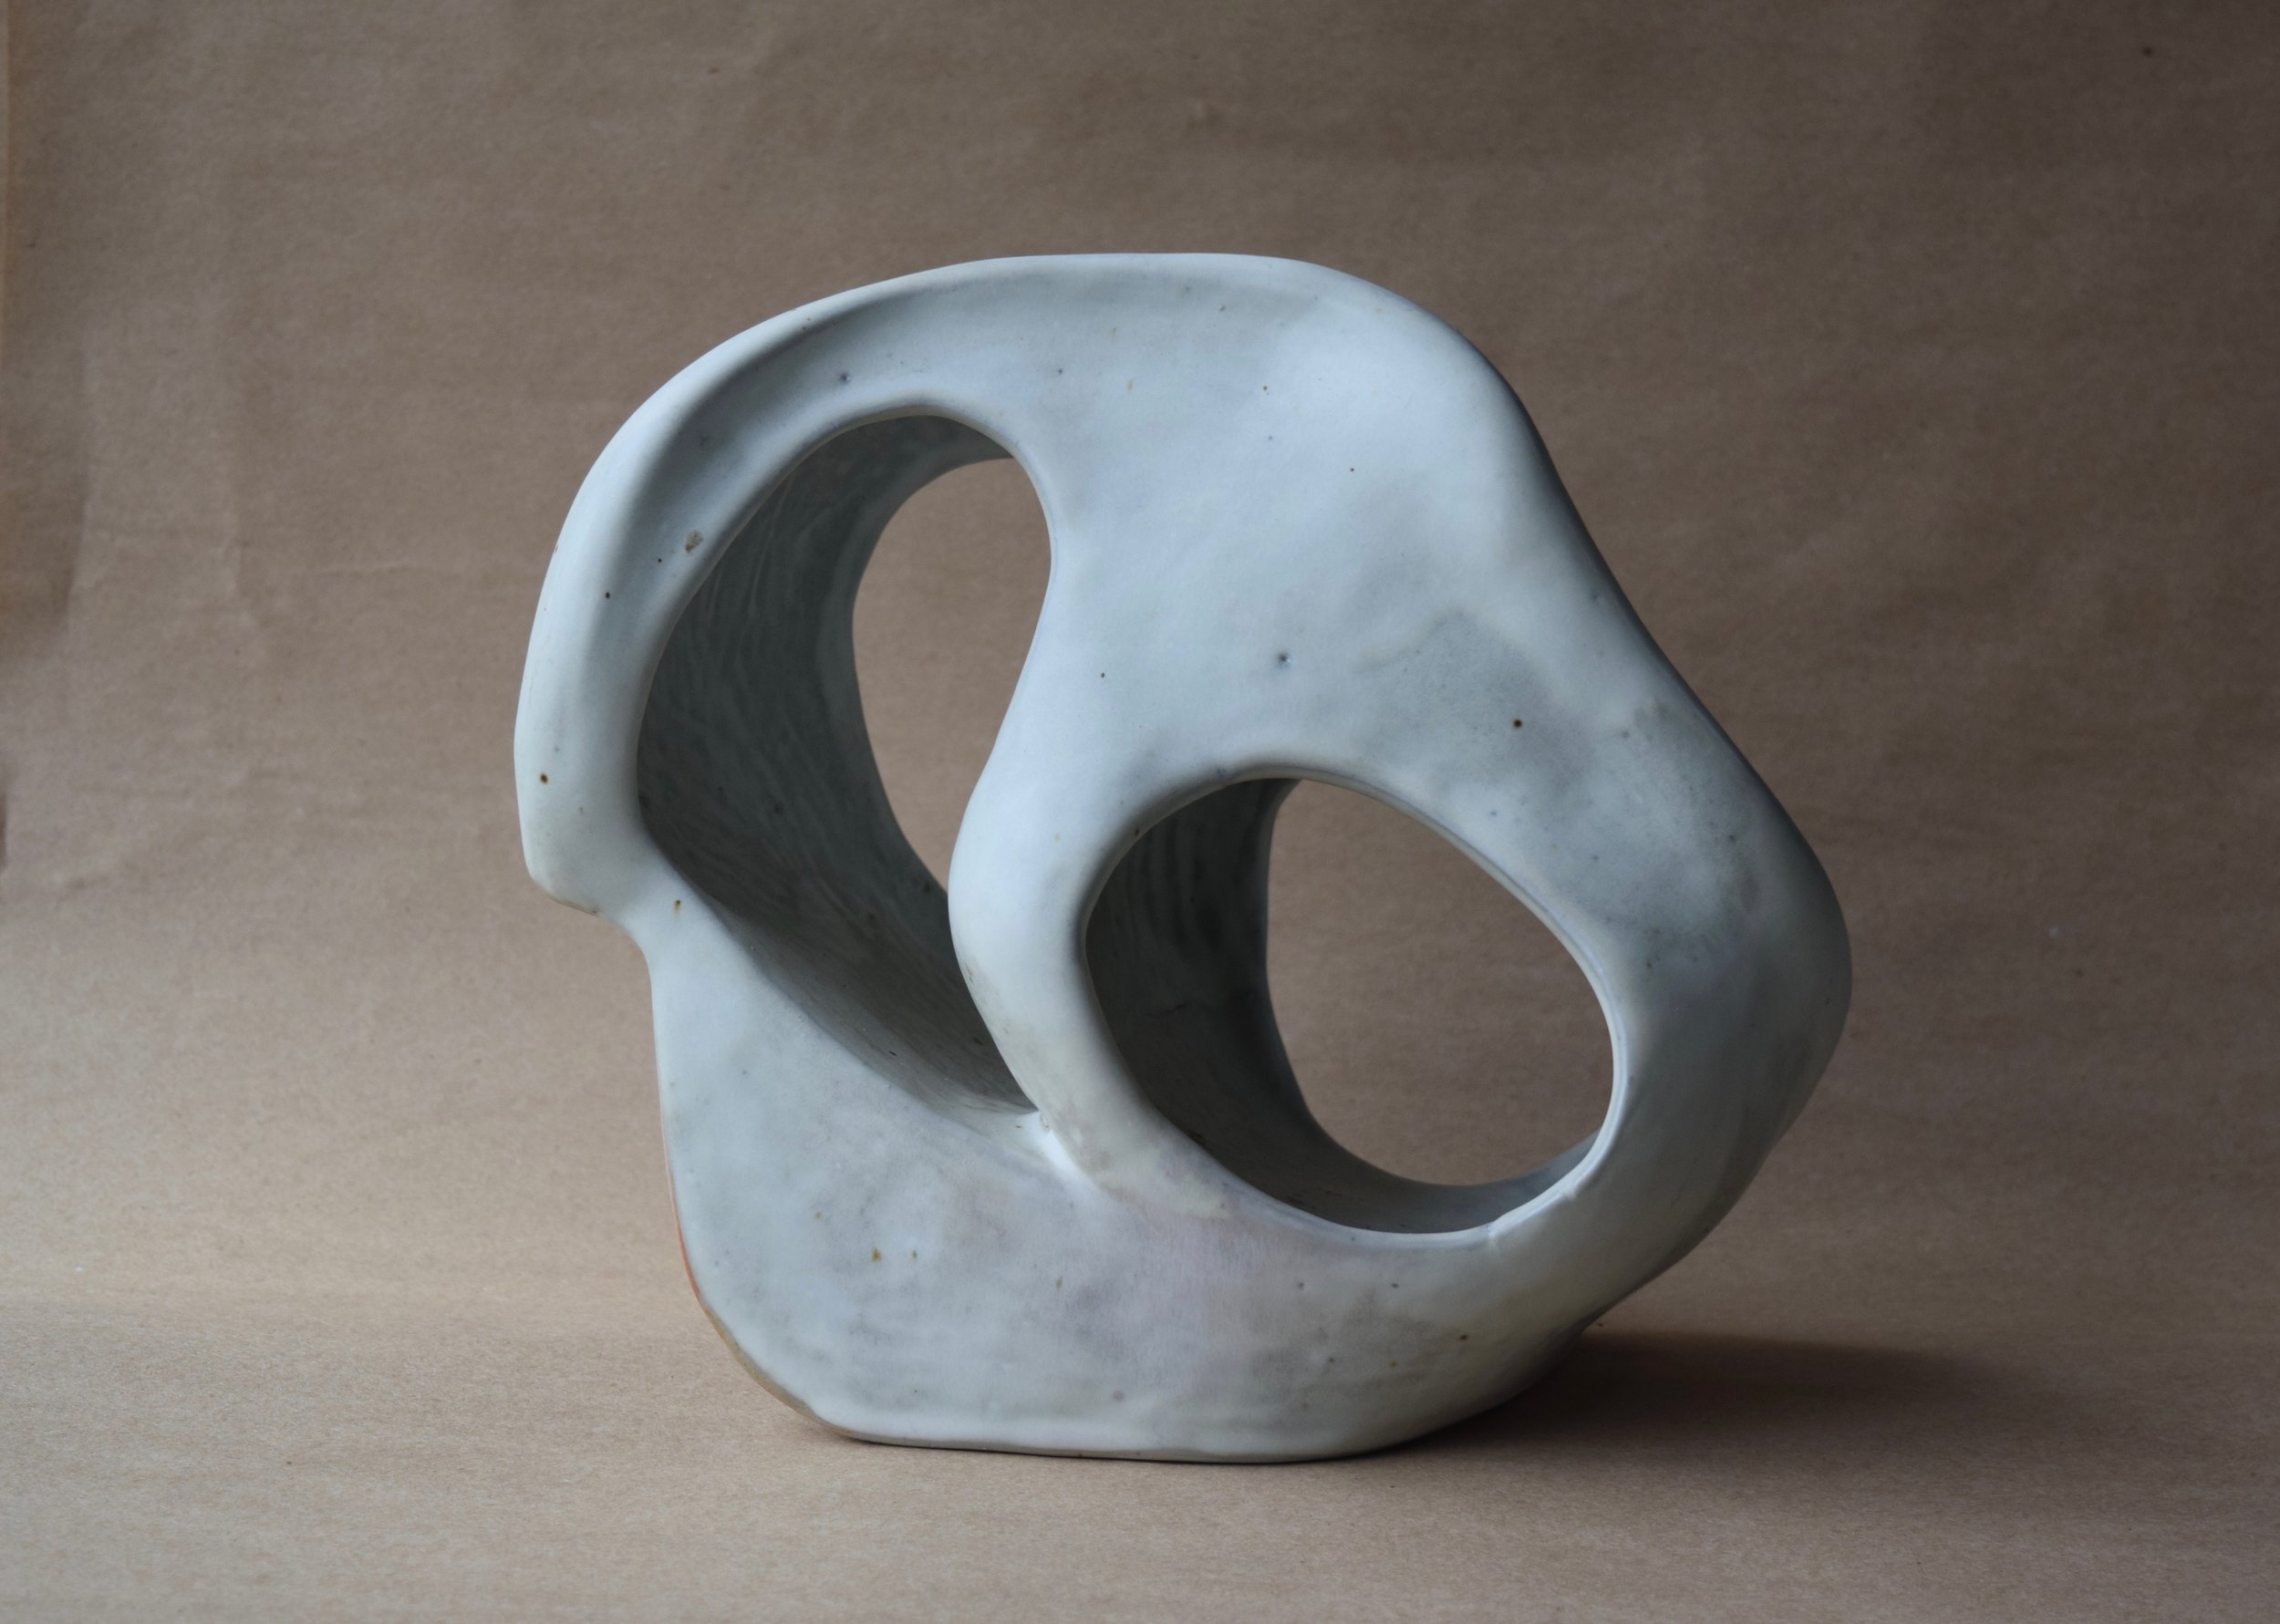  Untitled, 2013, stoneware, reduction, glazed, 10 x 13 x 10 in, SOLD 